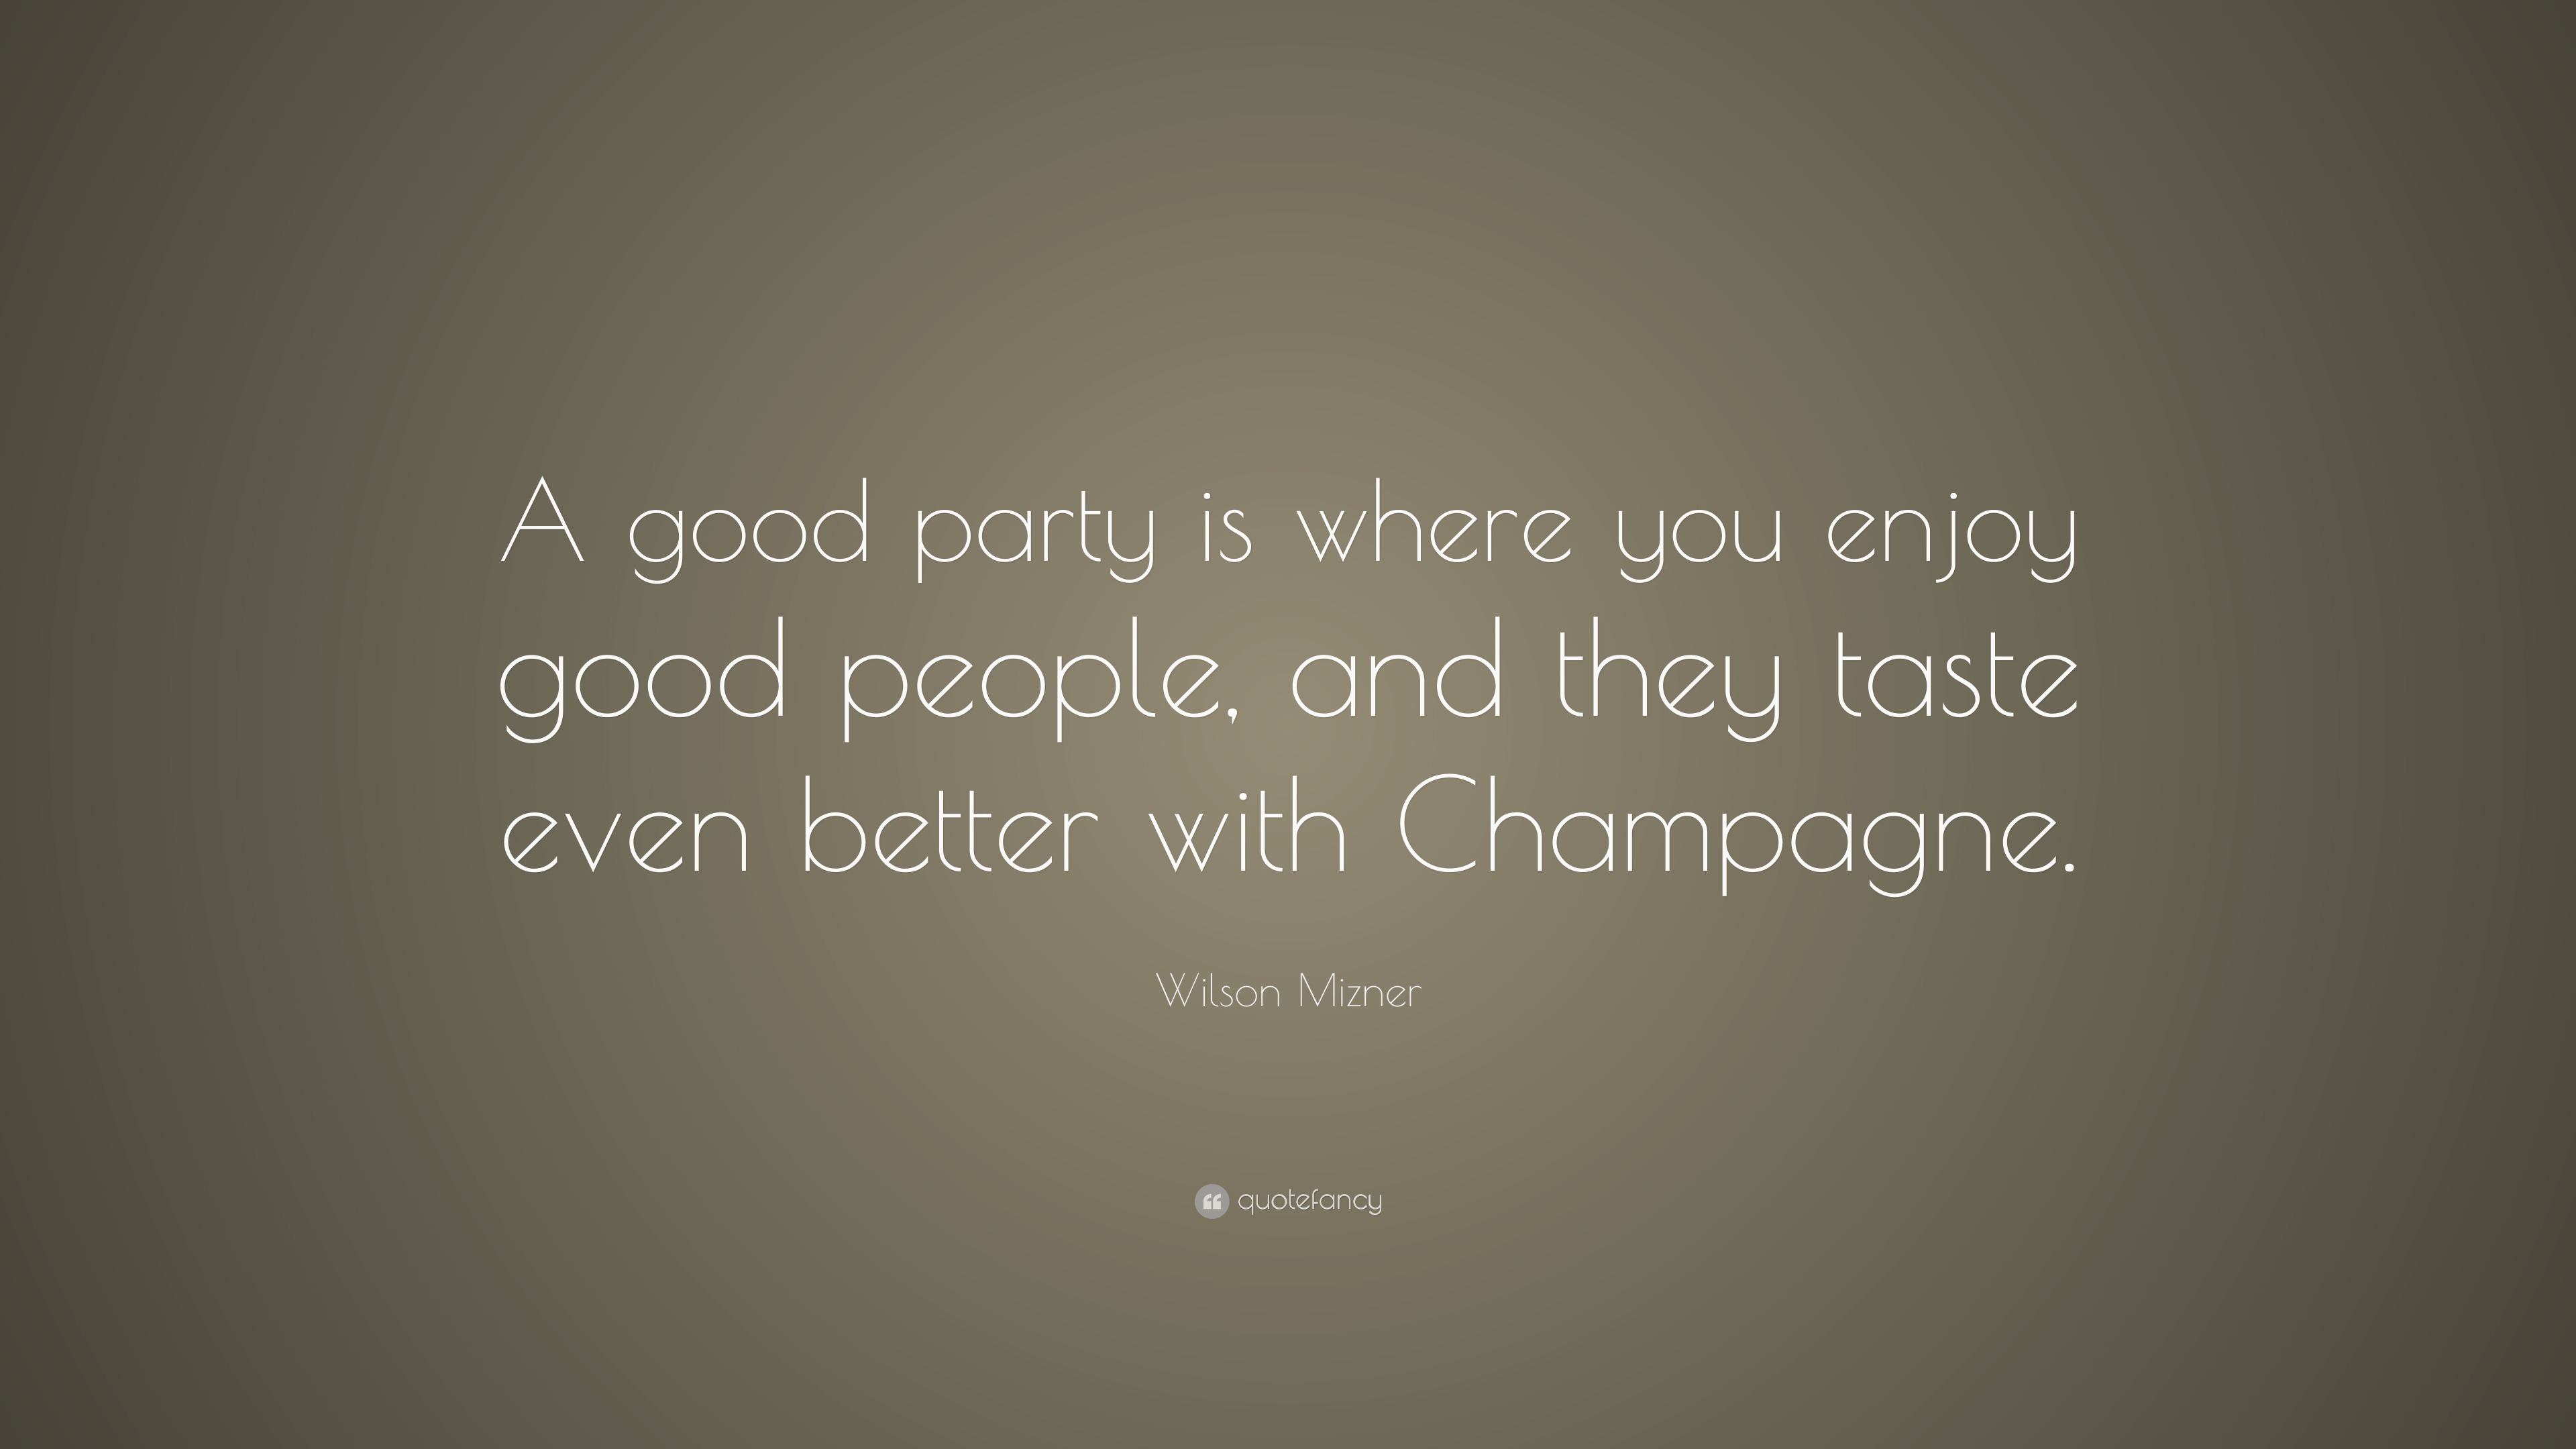 Wilson Mizner Quote: “A good party is where you enjoy good people, and ...